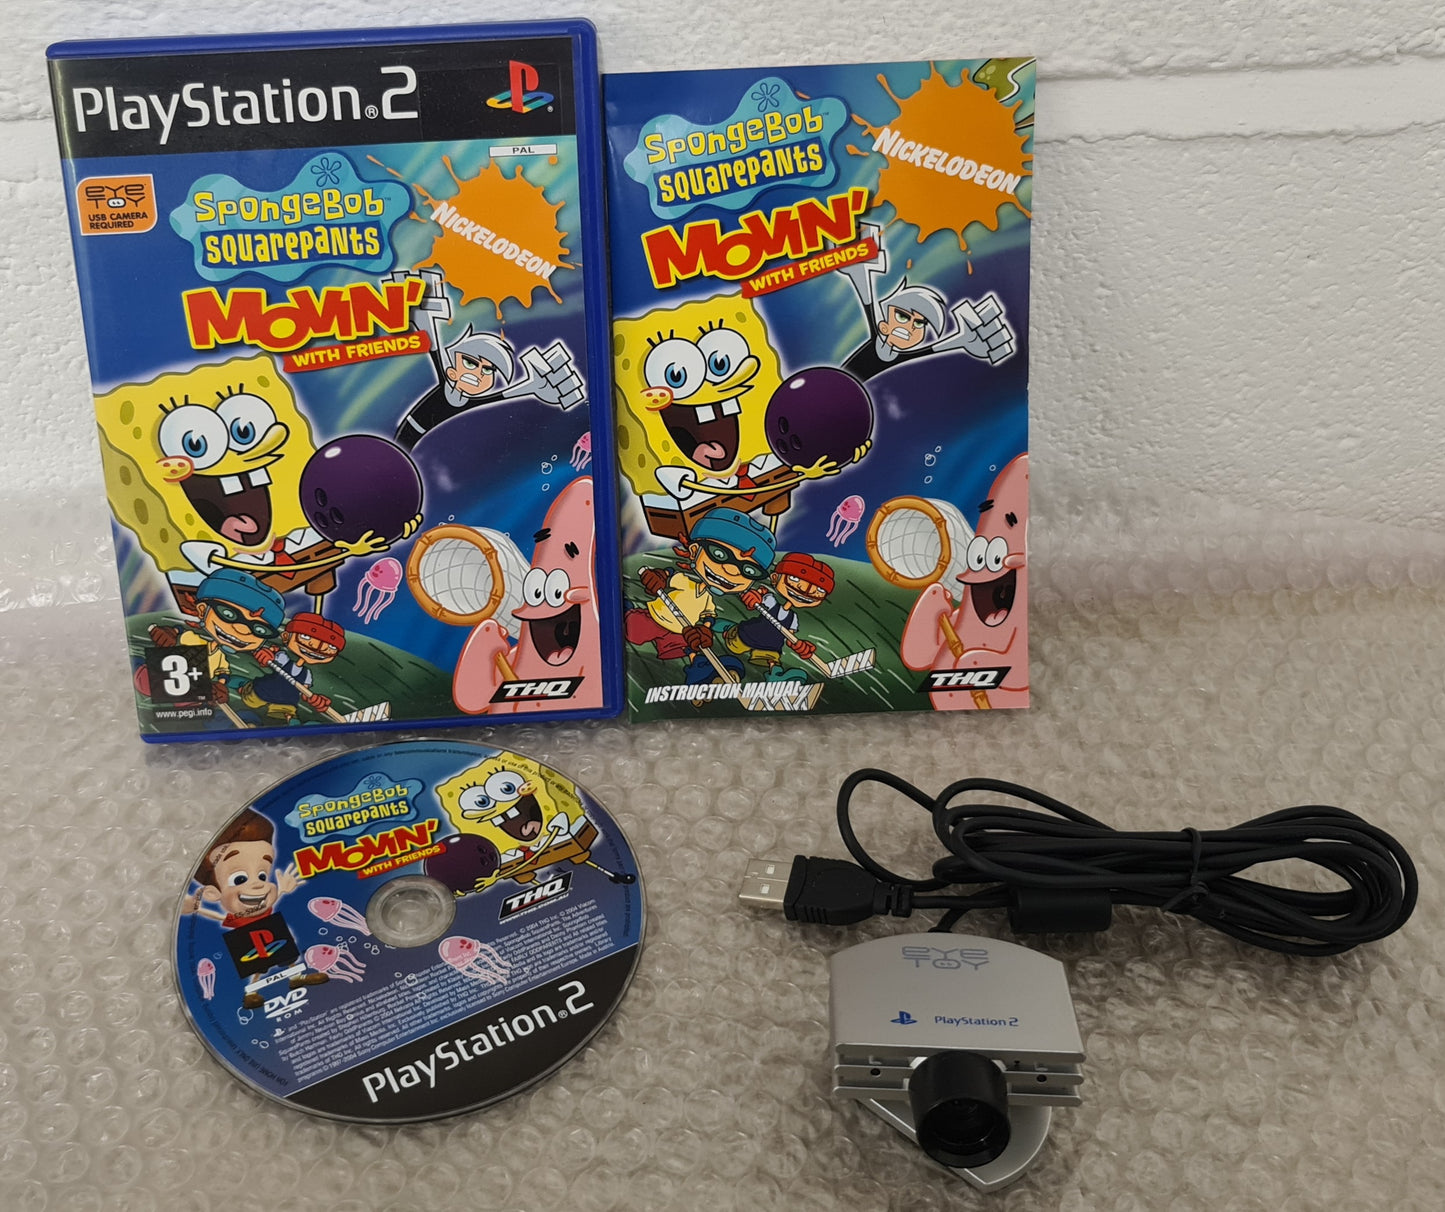 Spongebob Squarepants Movin with Friends with Eyetoy Camera PS2